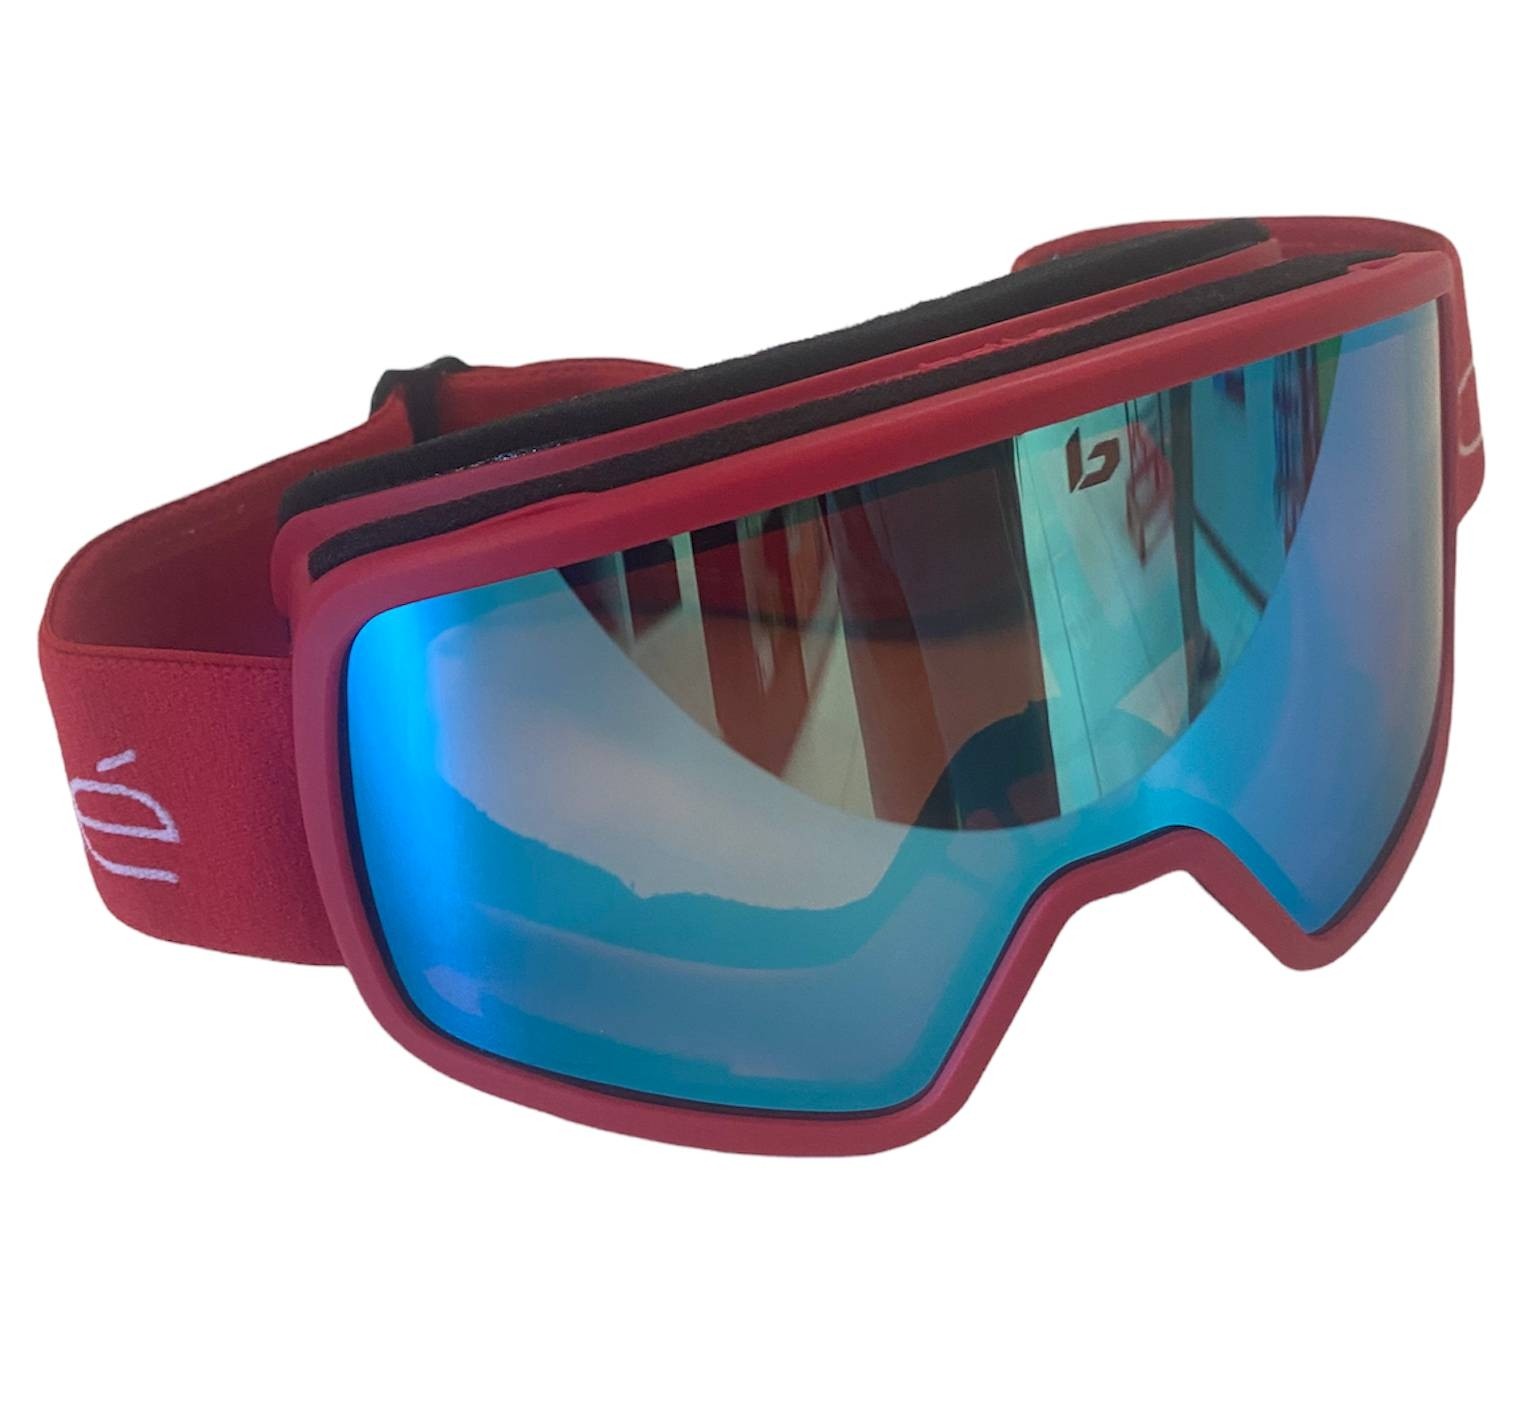 Bolle Ski ladies googles red colour Bolle make with adjustable strap 